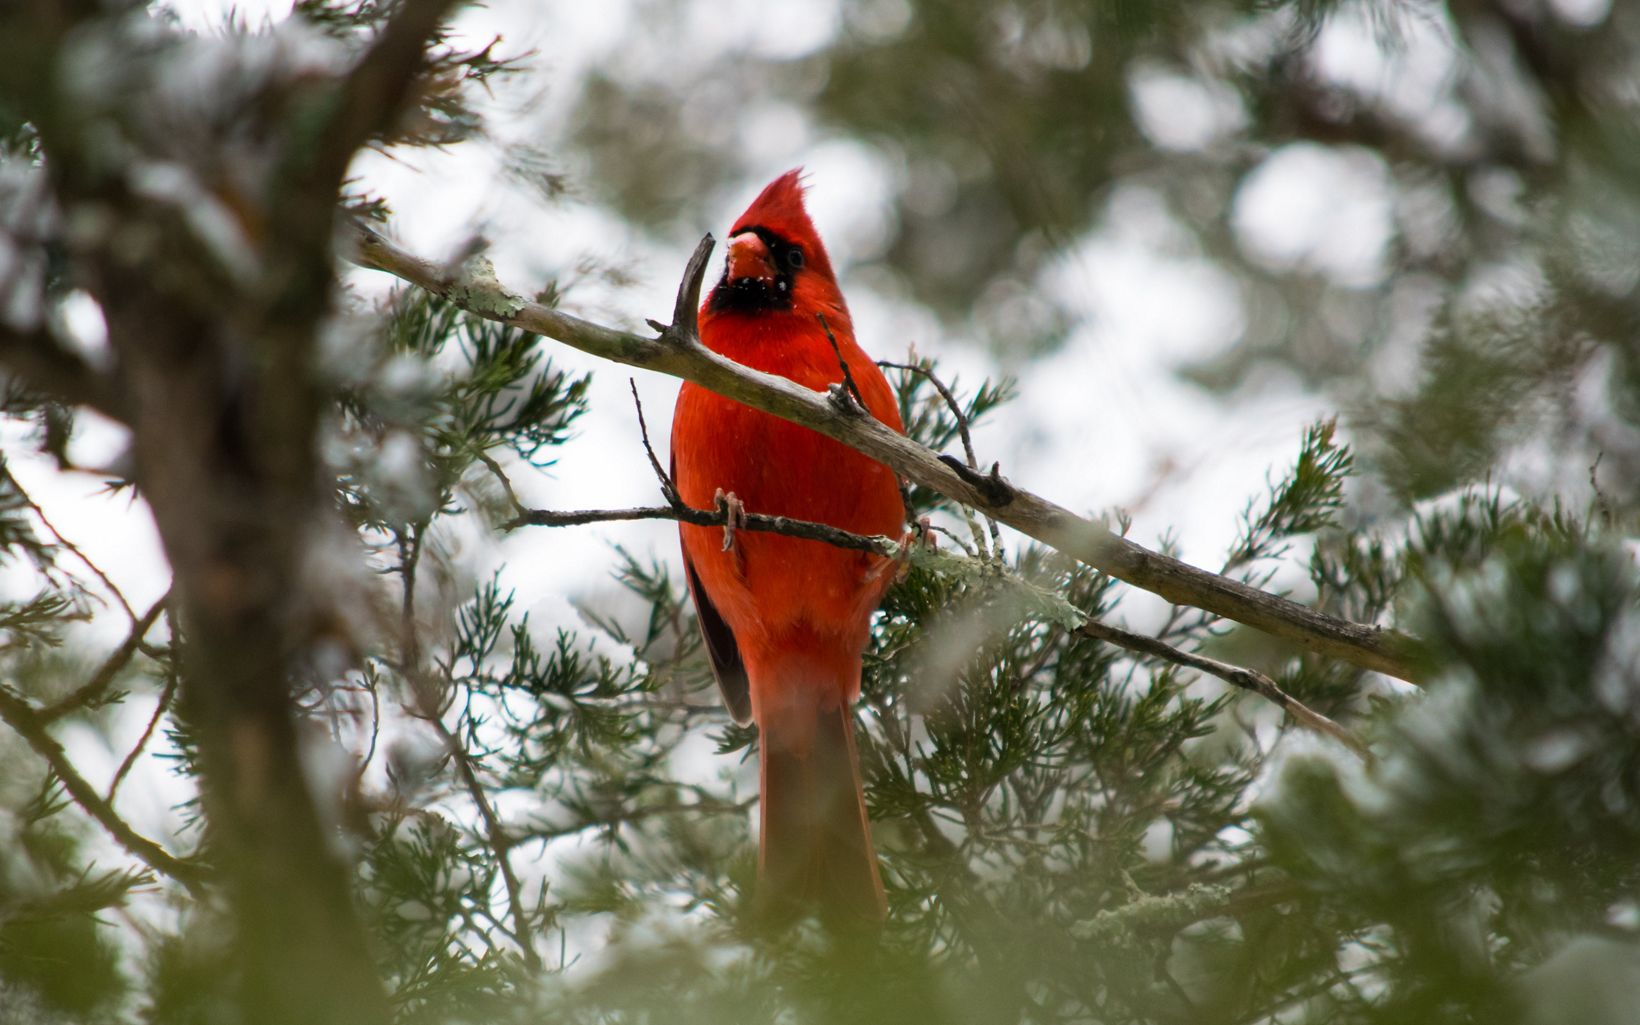 Male Northern cardinal Some songbirds, like northern cardinals, can be seen year-round at Lizard Tail Swamp.  © Oliver Starks